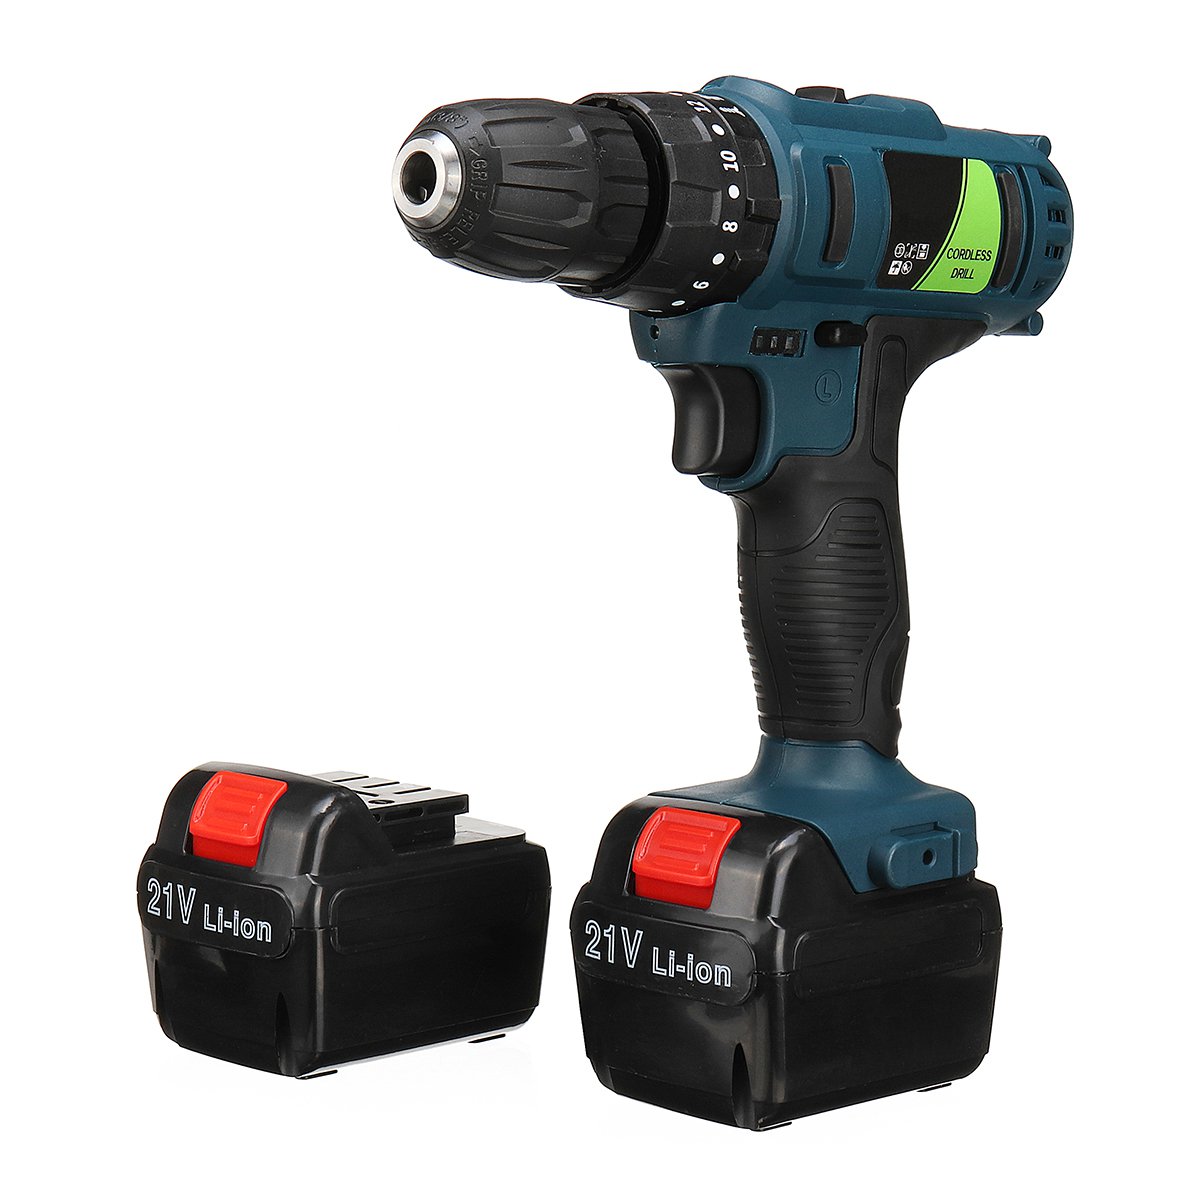 Adjustable-21V-Rechargeable-Cordless-Power-Impact-Drill-Electric-Screwdriver-with-2-Li-ion-Battery-1354629-7